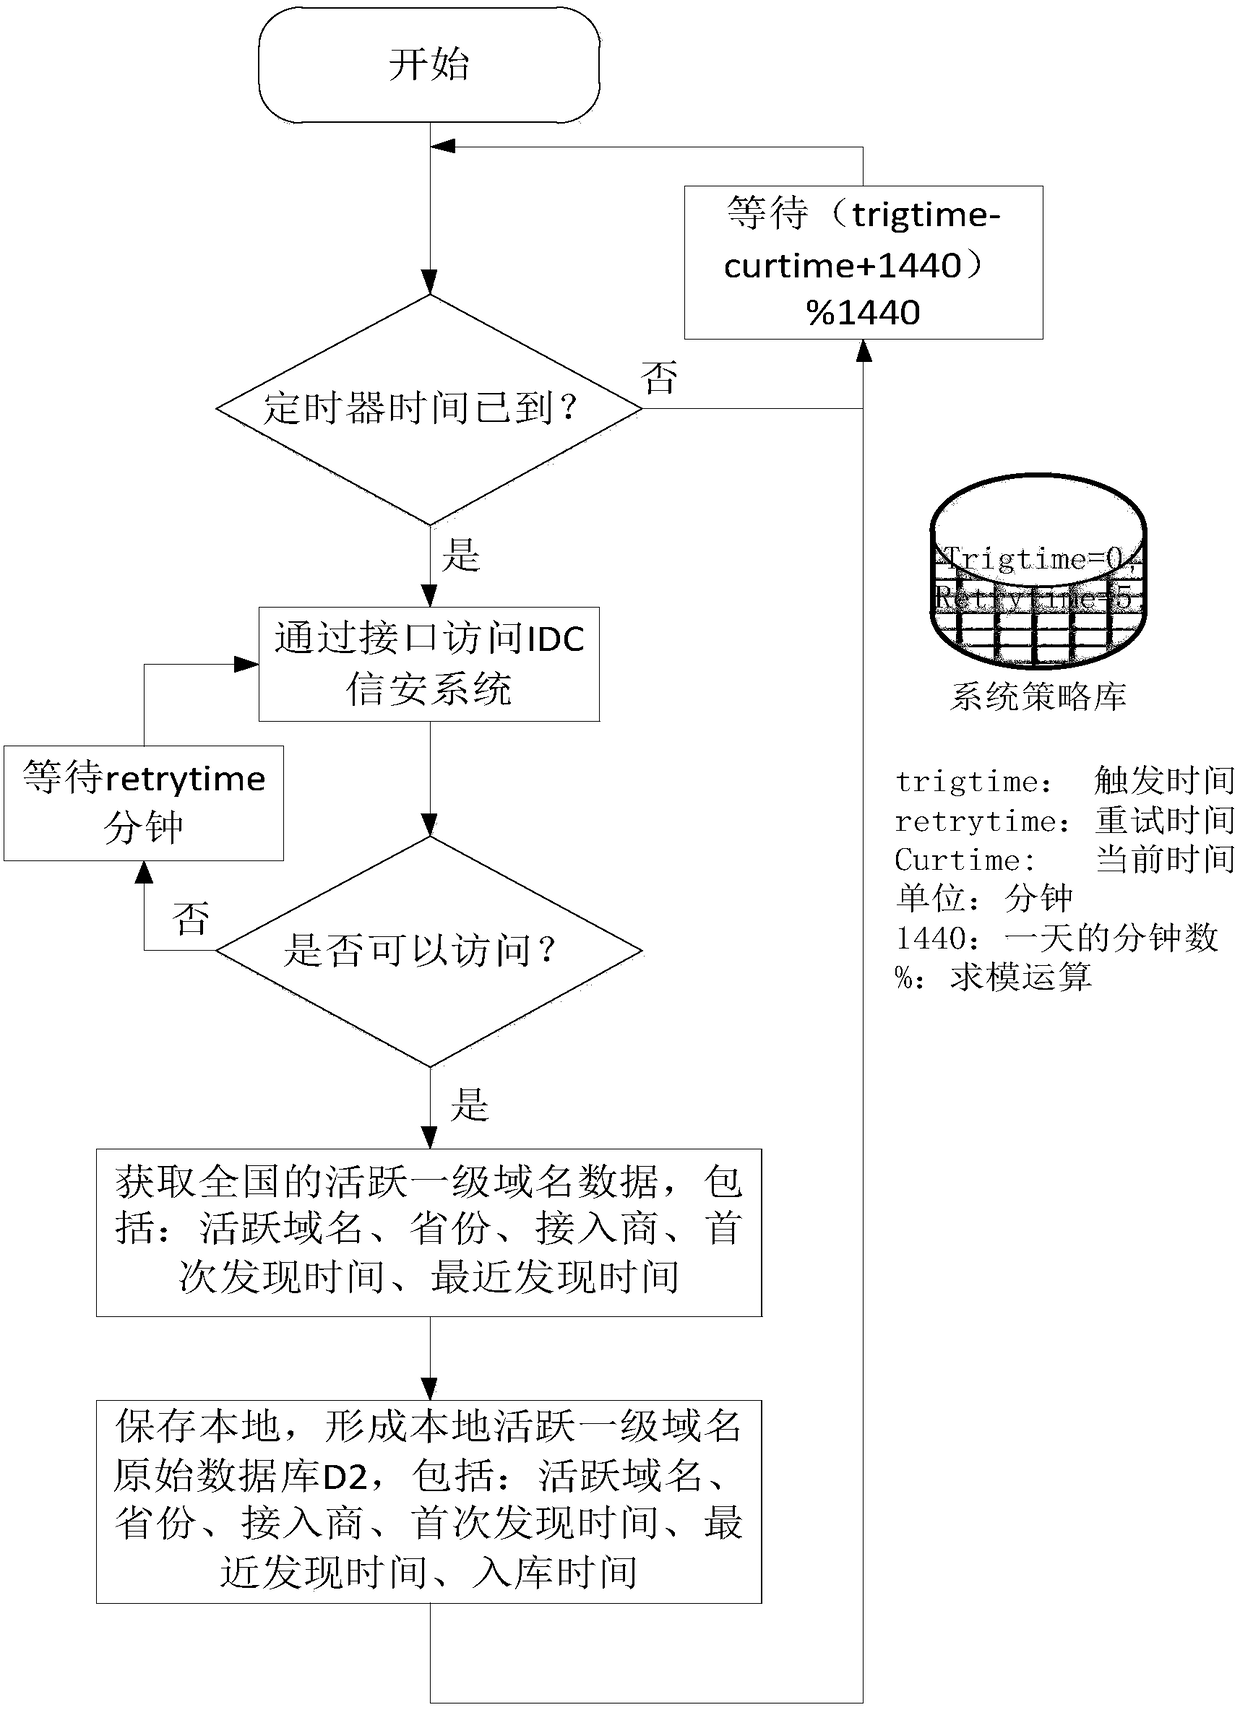 A method for building domain name server system knowledge map based on active and passive data